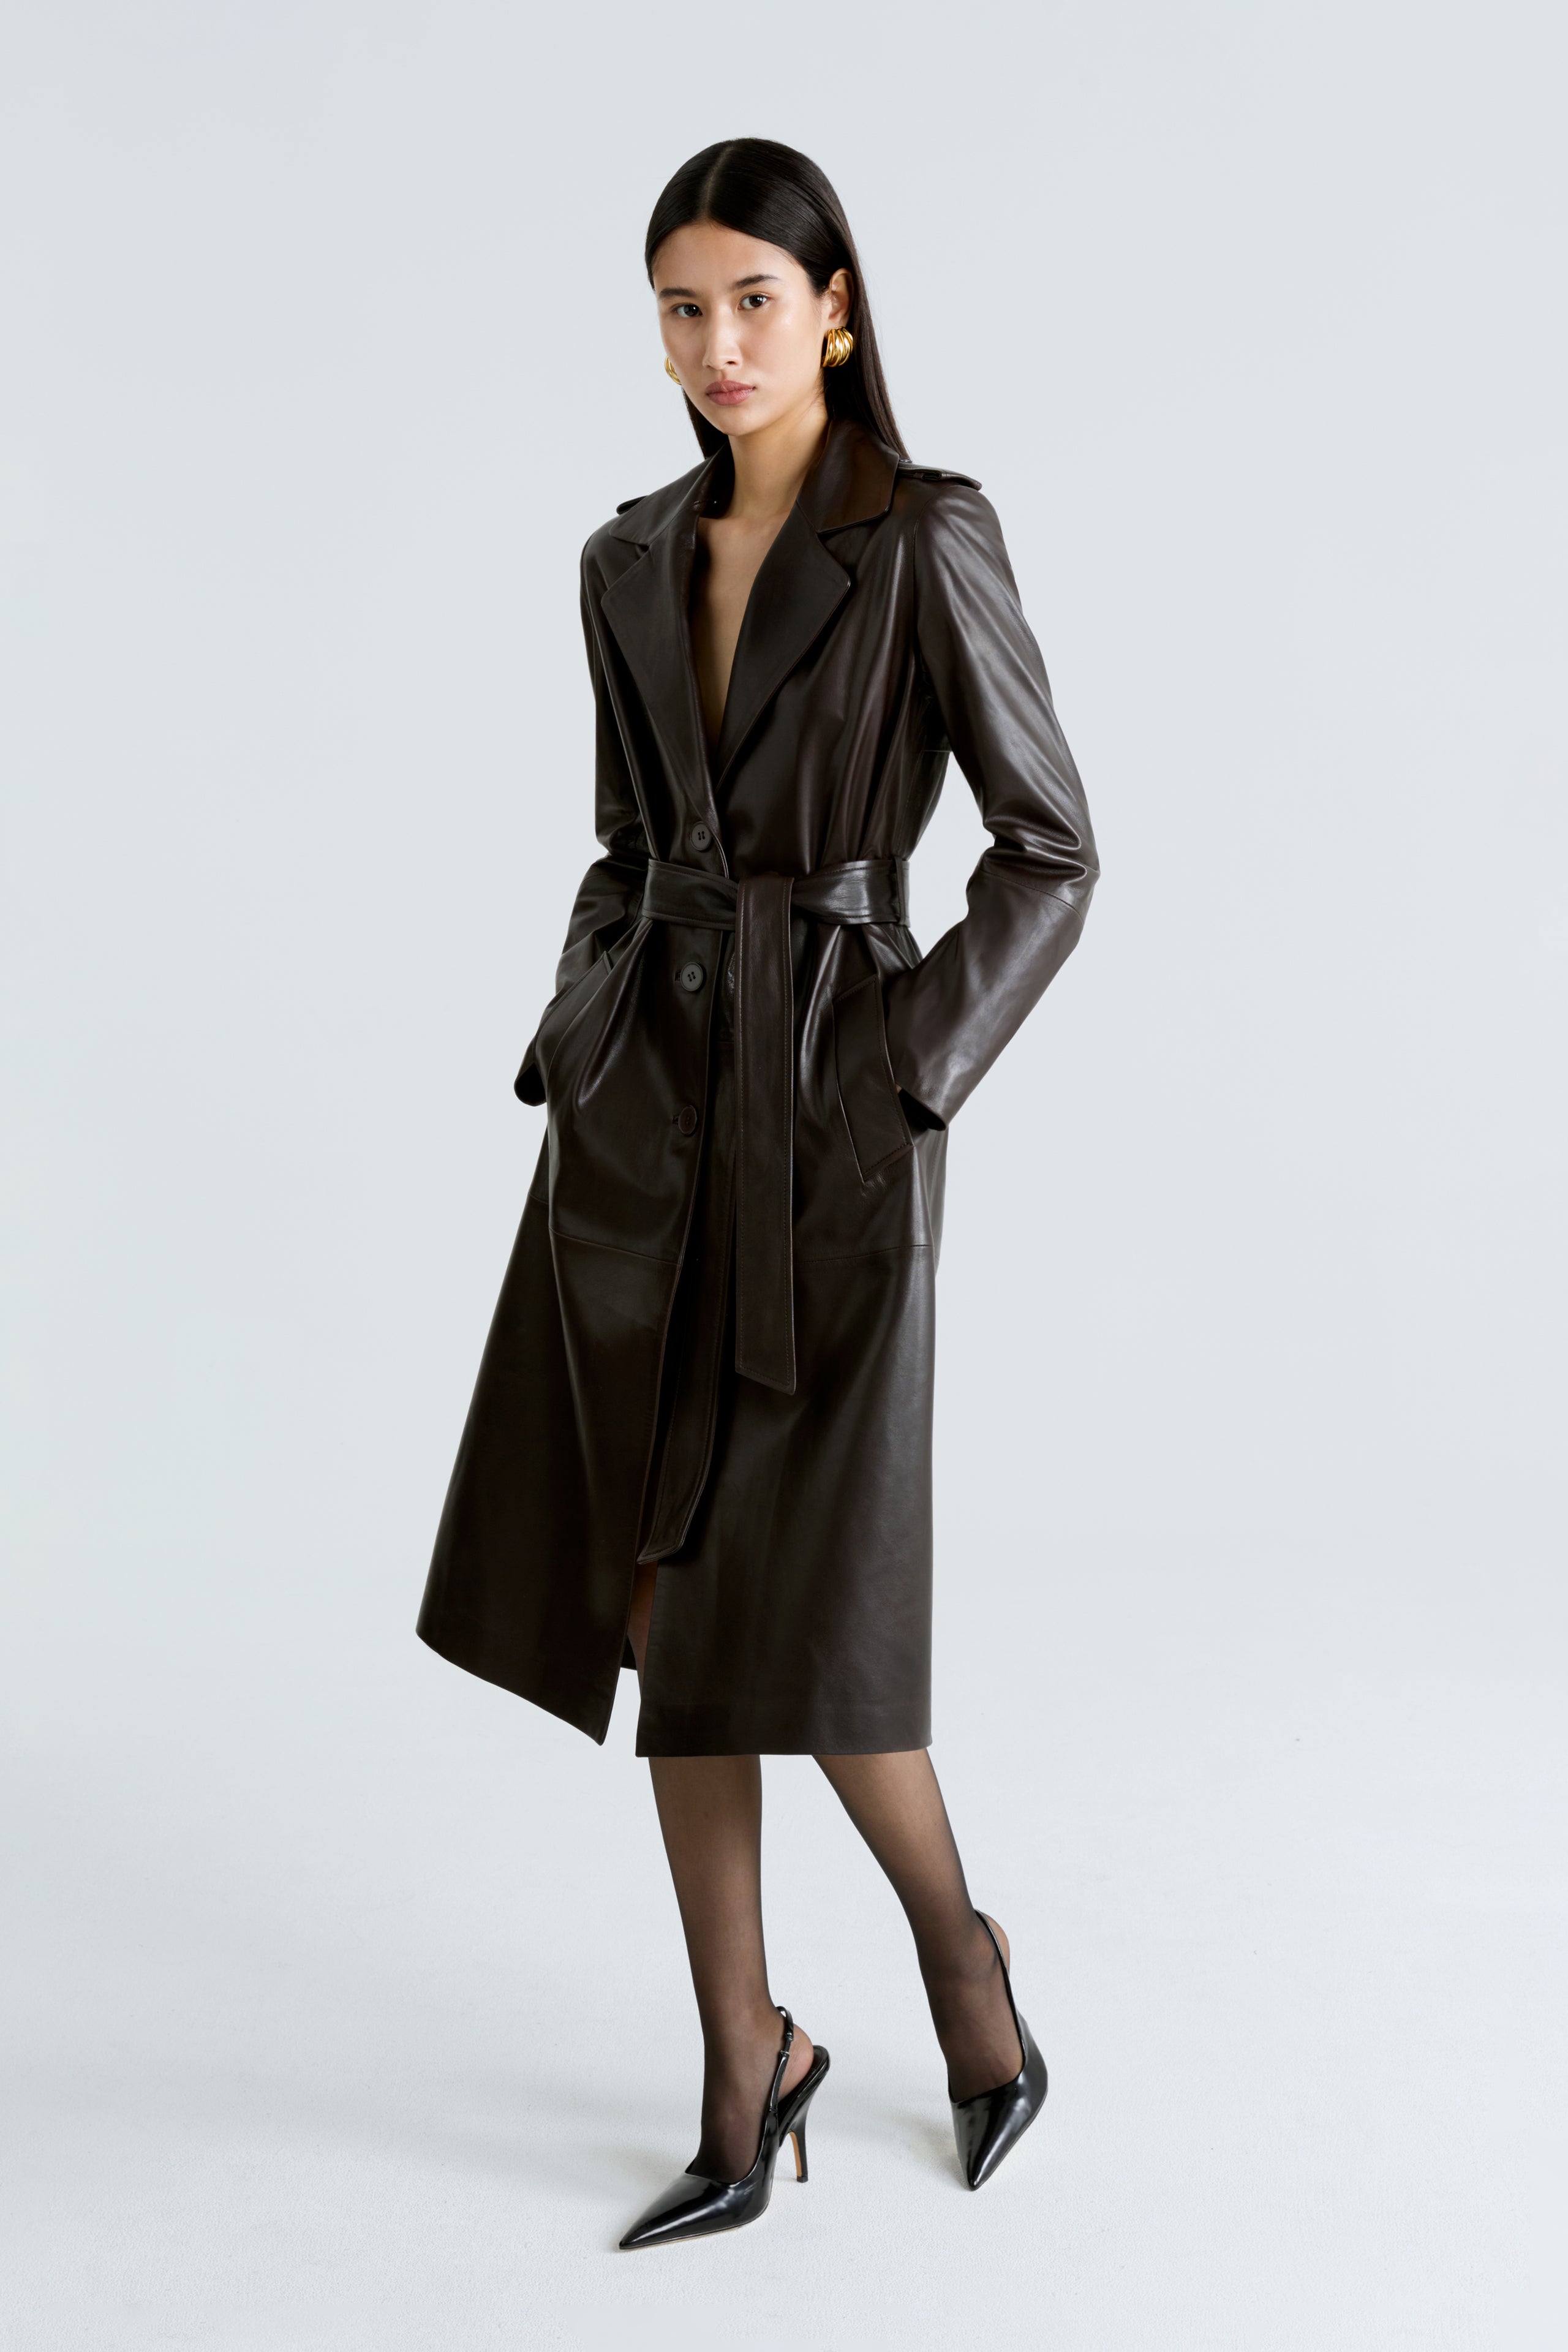 Model is wearing the Marla Chocolat Fondant Belted Leather Coat Side